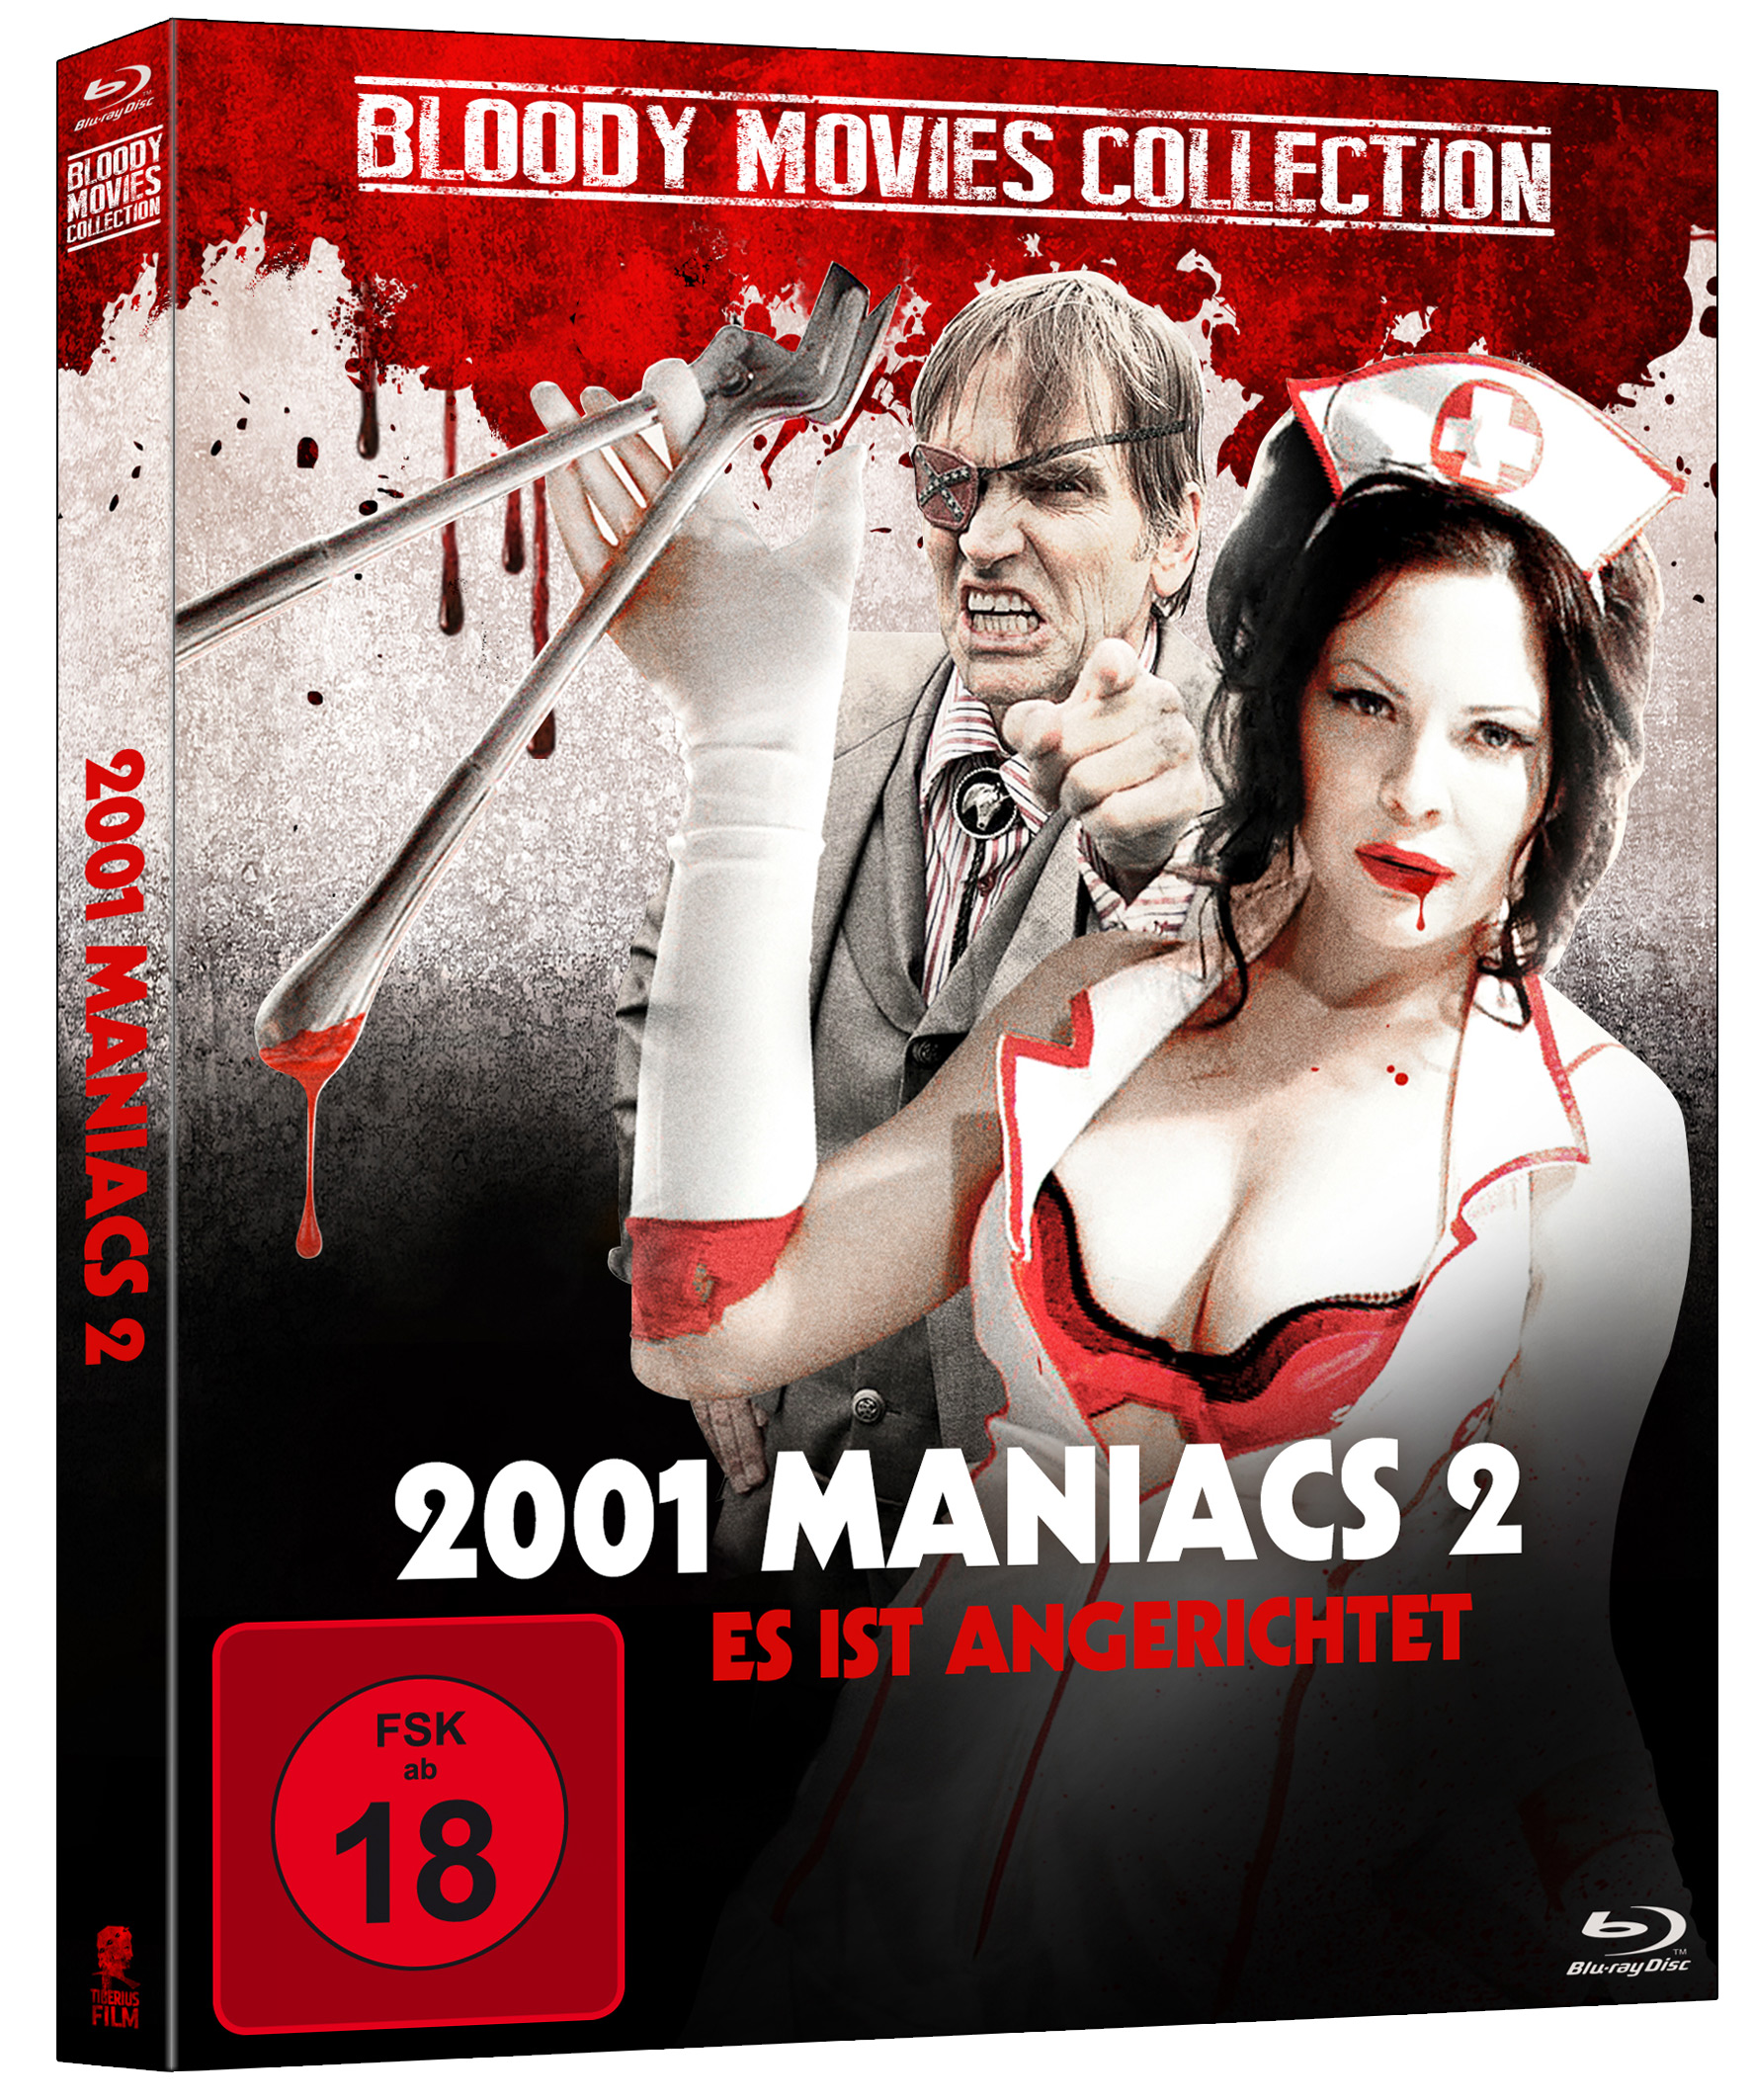 2001 Maniacs 2 (uncut) - Bloody Movies Collection